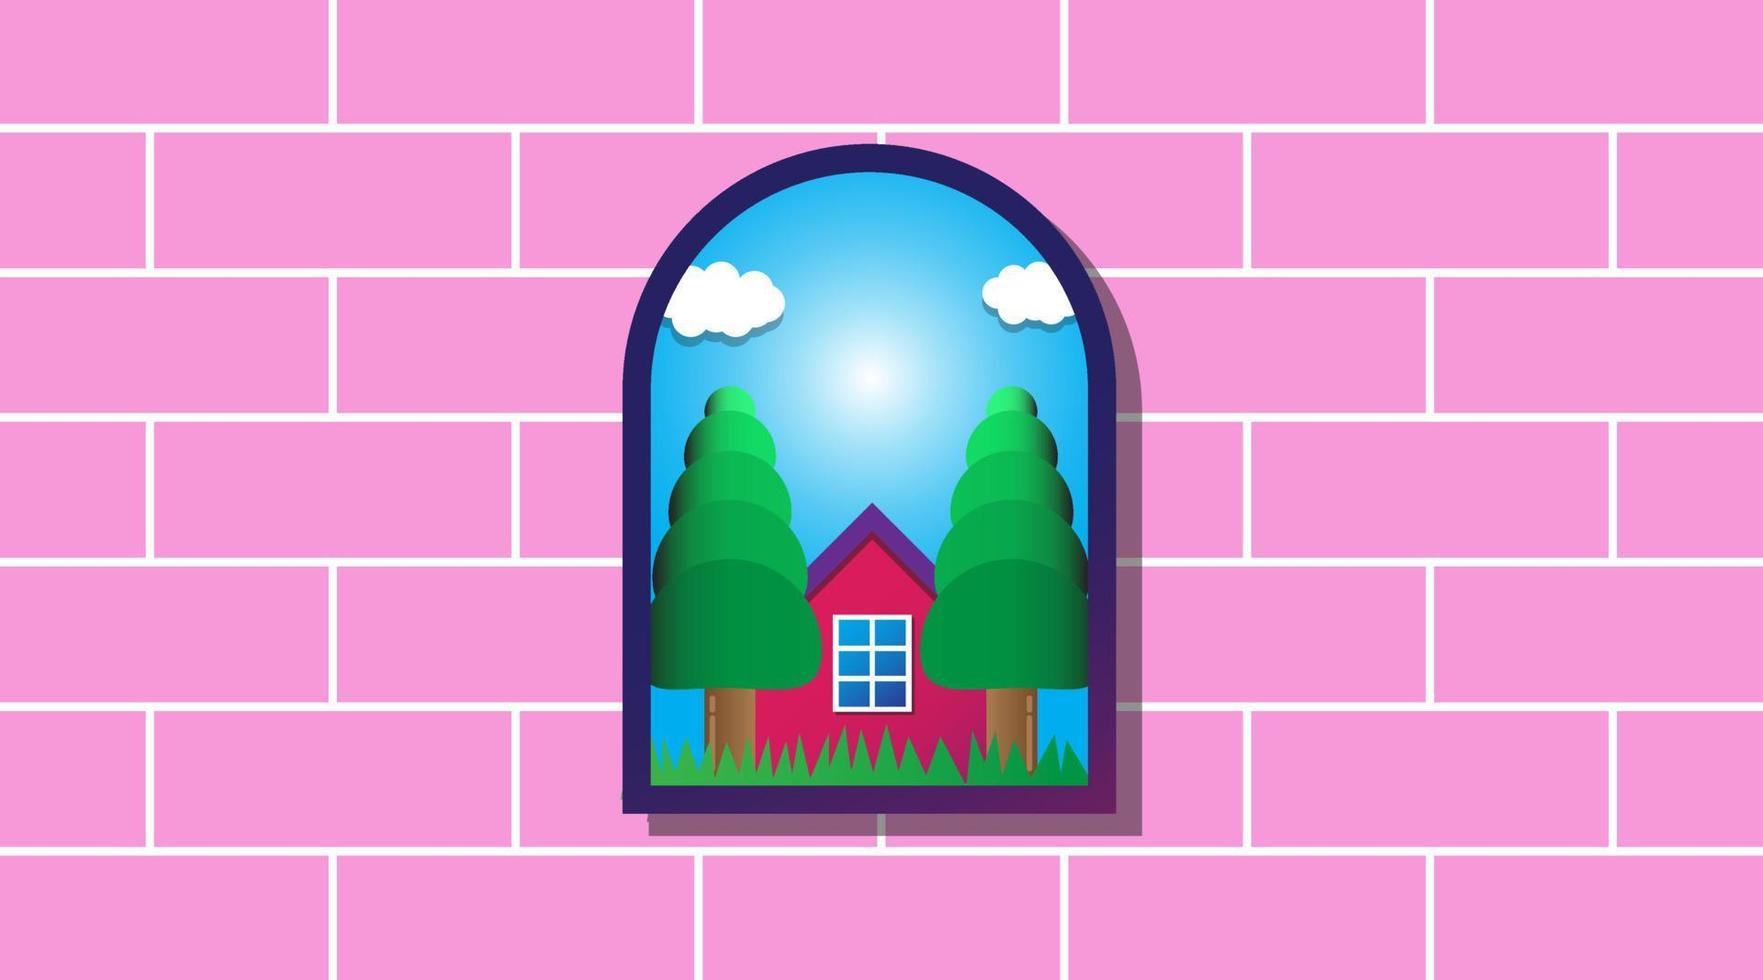 Curved house decoration, pink striped wallpaper on the walls. Comfortable room interiors. Flat vector illustration. Suitable for home decoration